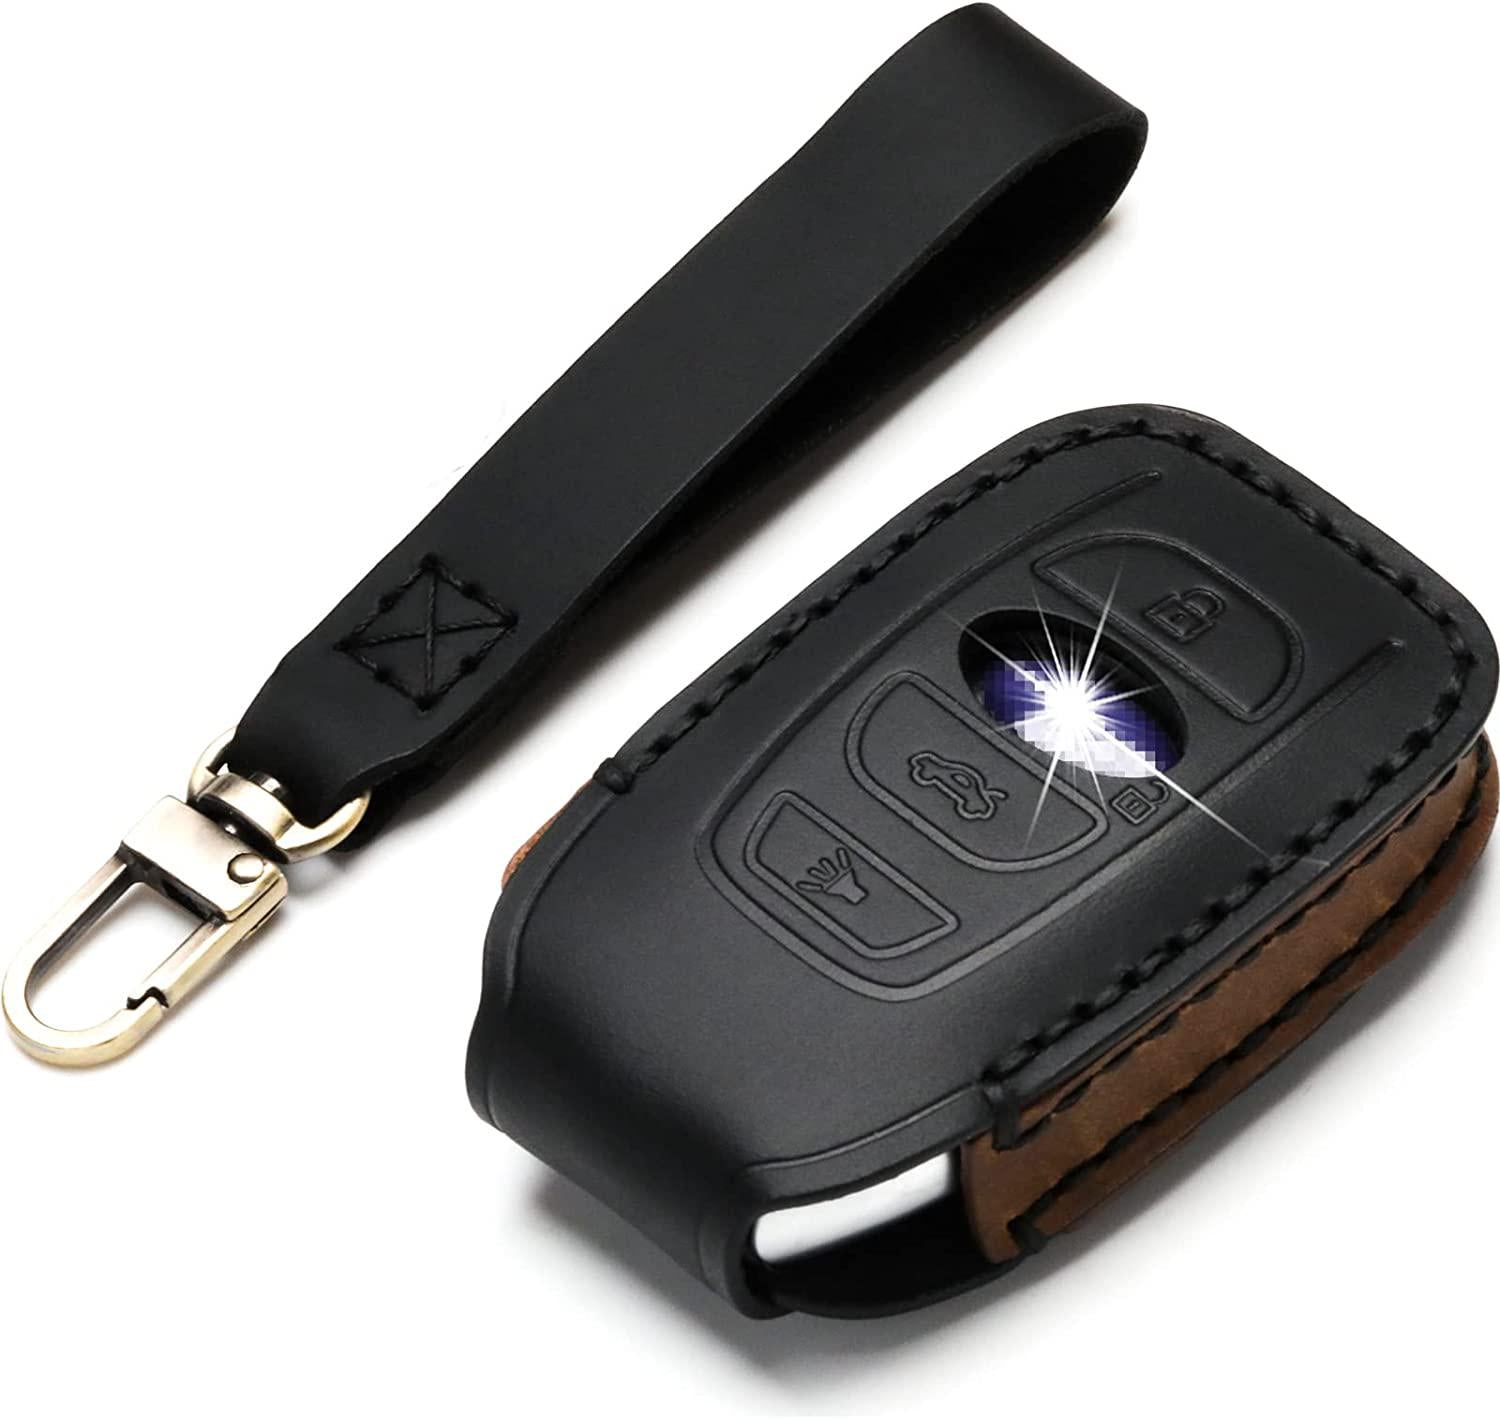 ZiHafate, Leather Subaru Dedicated Cover Key Fob Case, Suit for Keyless Remote Control for Subaru Forester, Impreza, Outback, WRX, BRZ, Legacy, and XV Crosstrek etc. (A-Black)